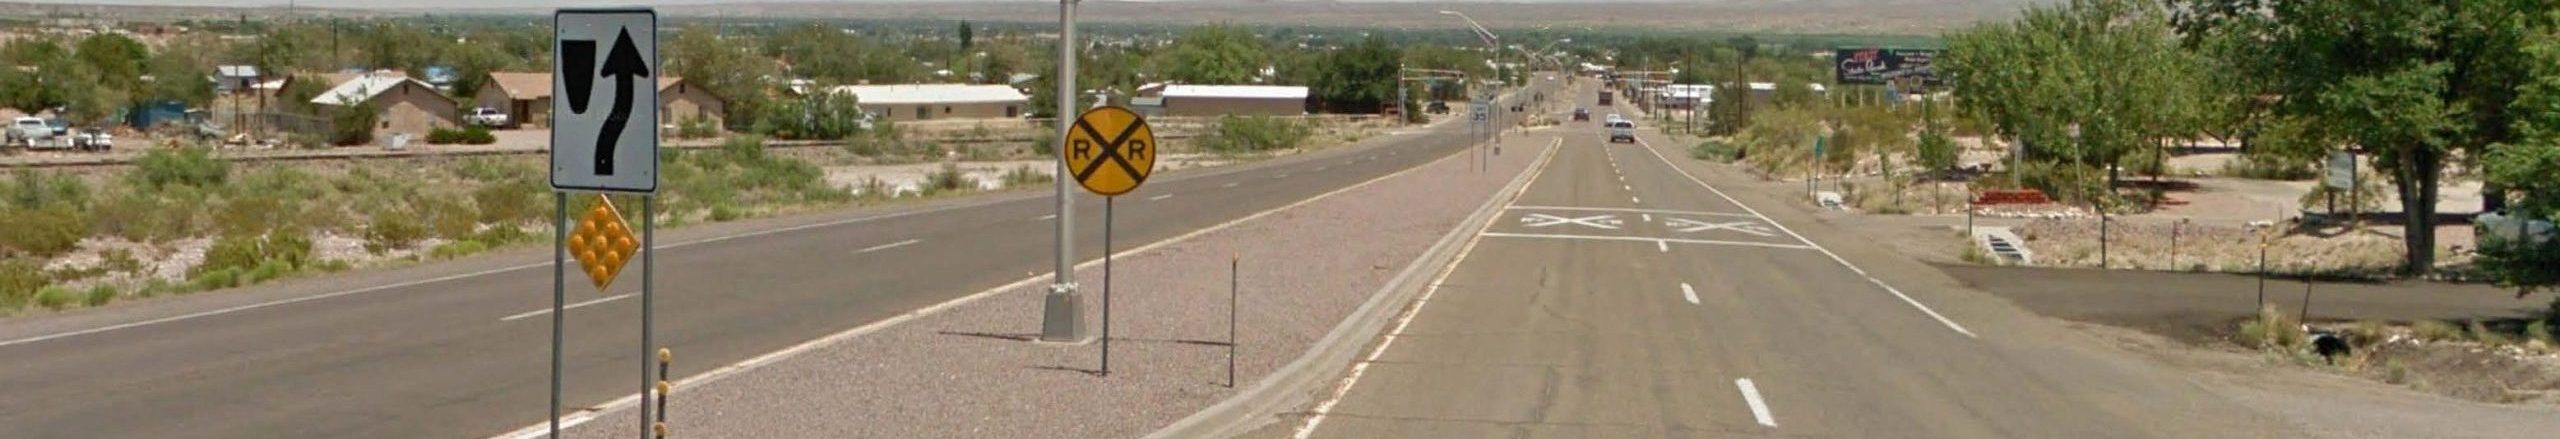 US 60 in Socorro, 4-lane section west of town